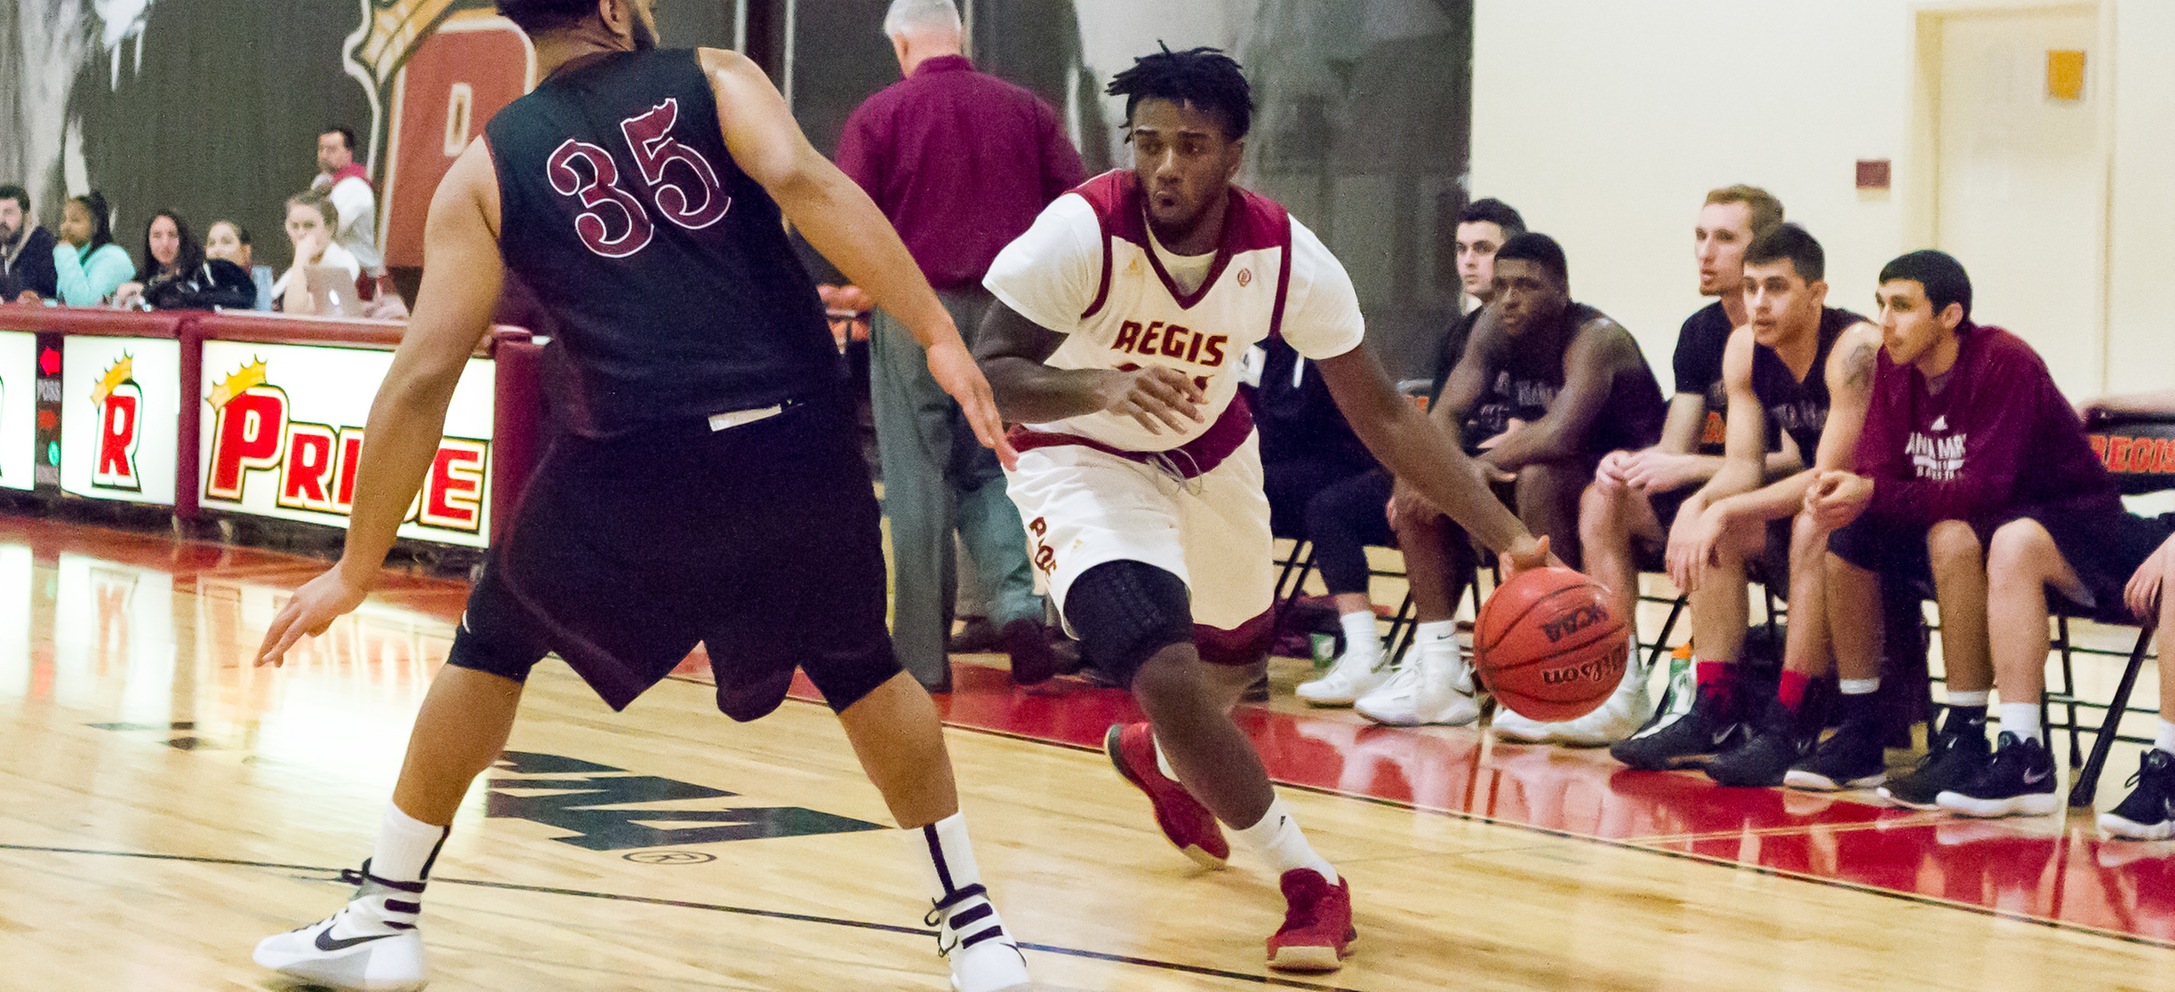 Blistering Second-Half Shooting Lifts Men's Basketball By Mount Ida